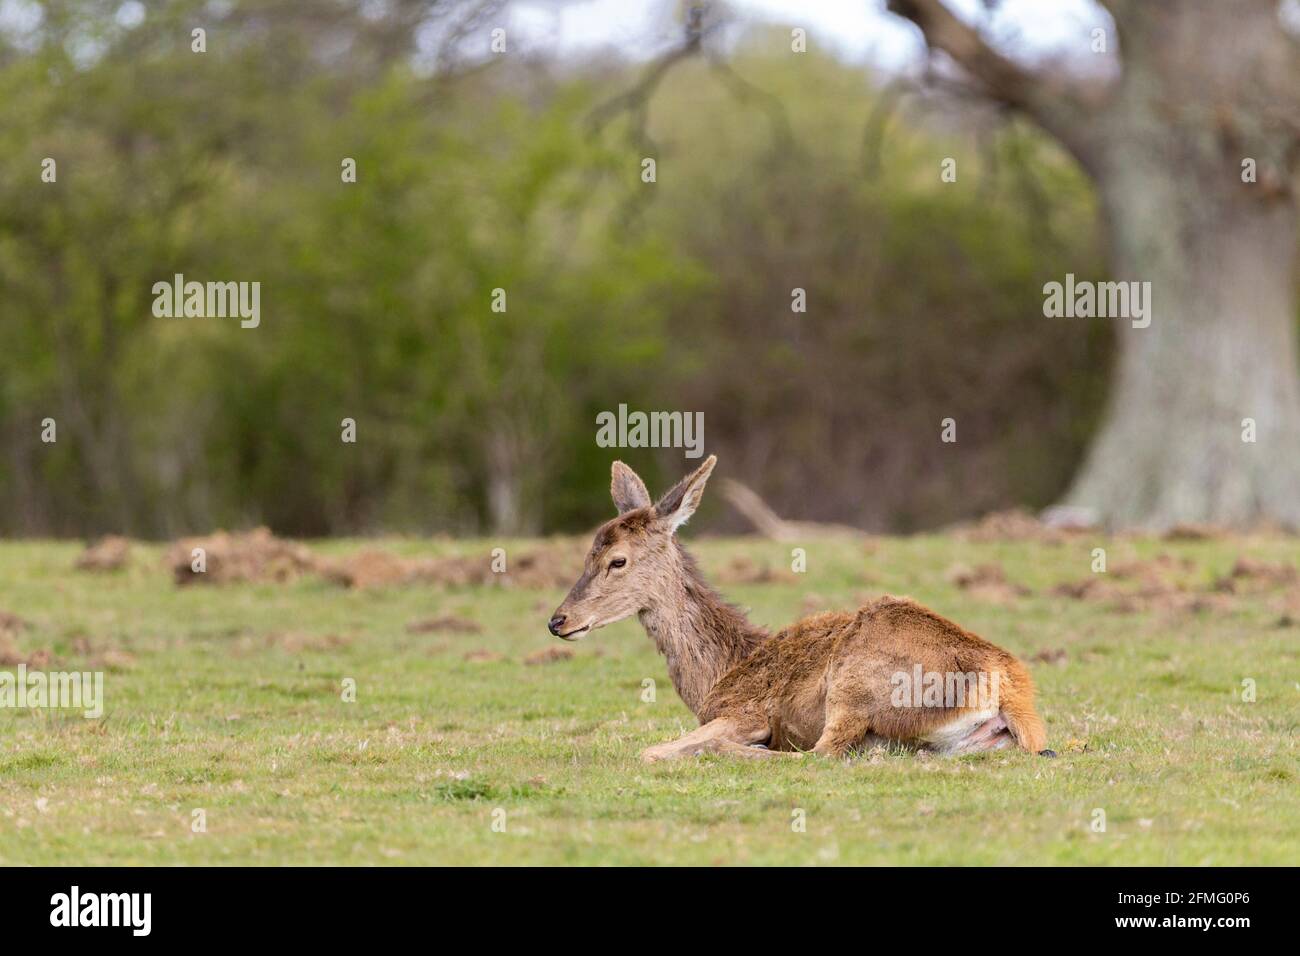 Fawn of red deer laying on open meadow grass not far from mother nearby. Brown red coat (no spots as in infant) long neck long pointed ears short tail Stock Photo